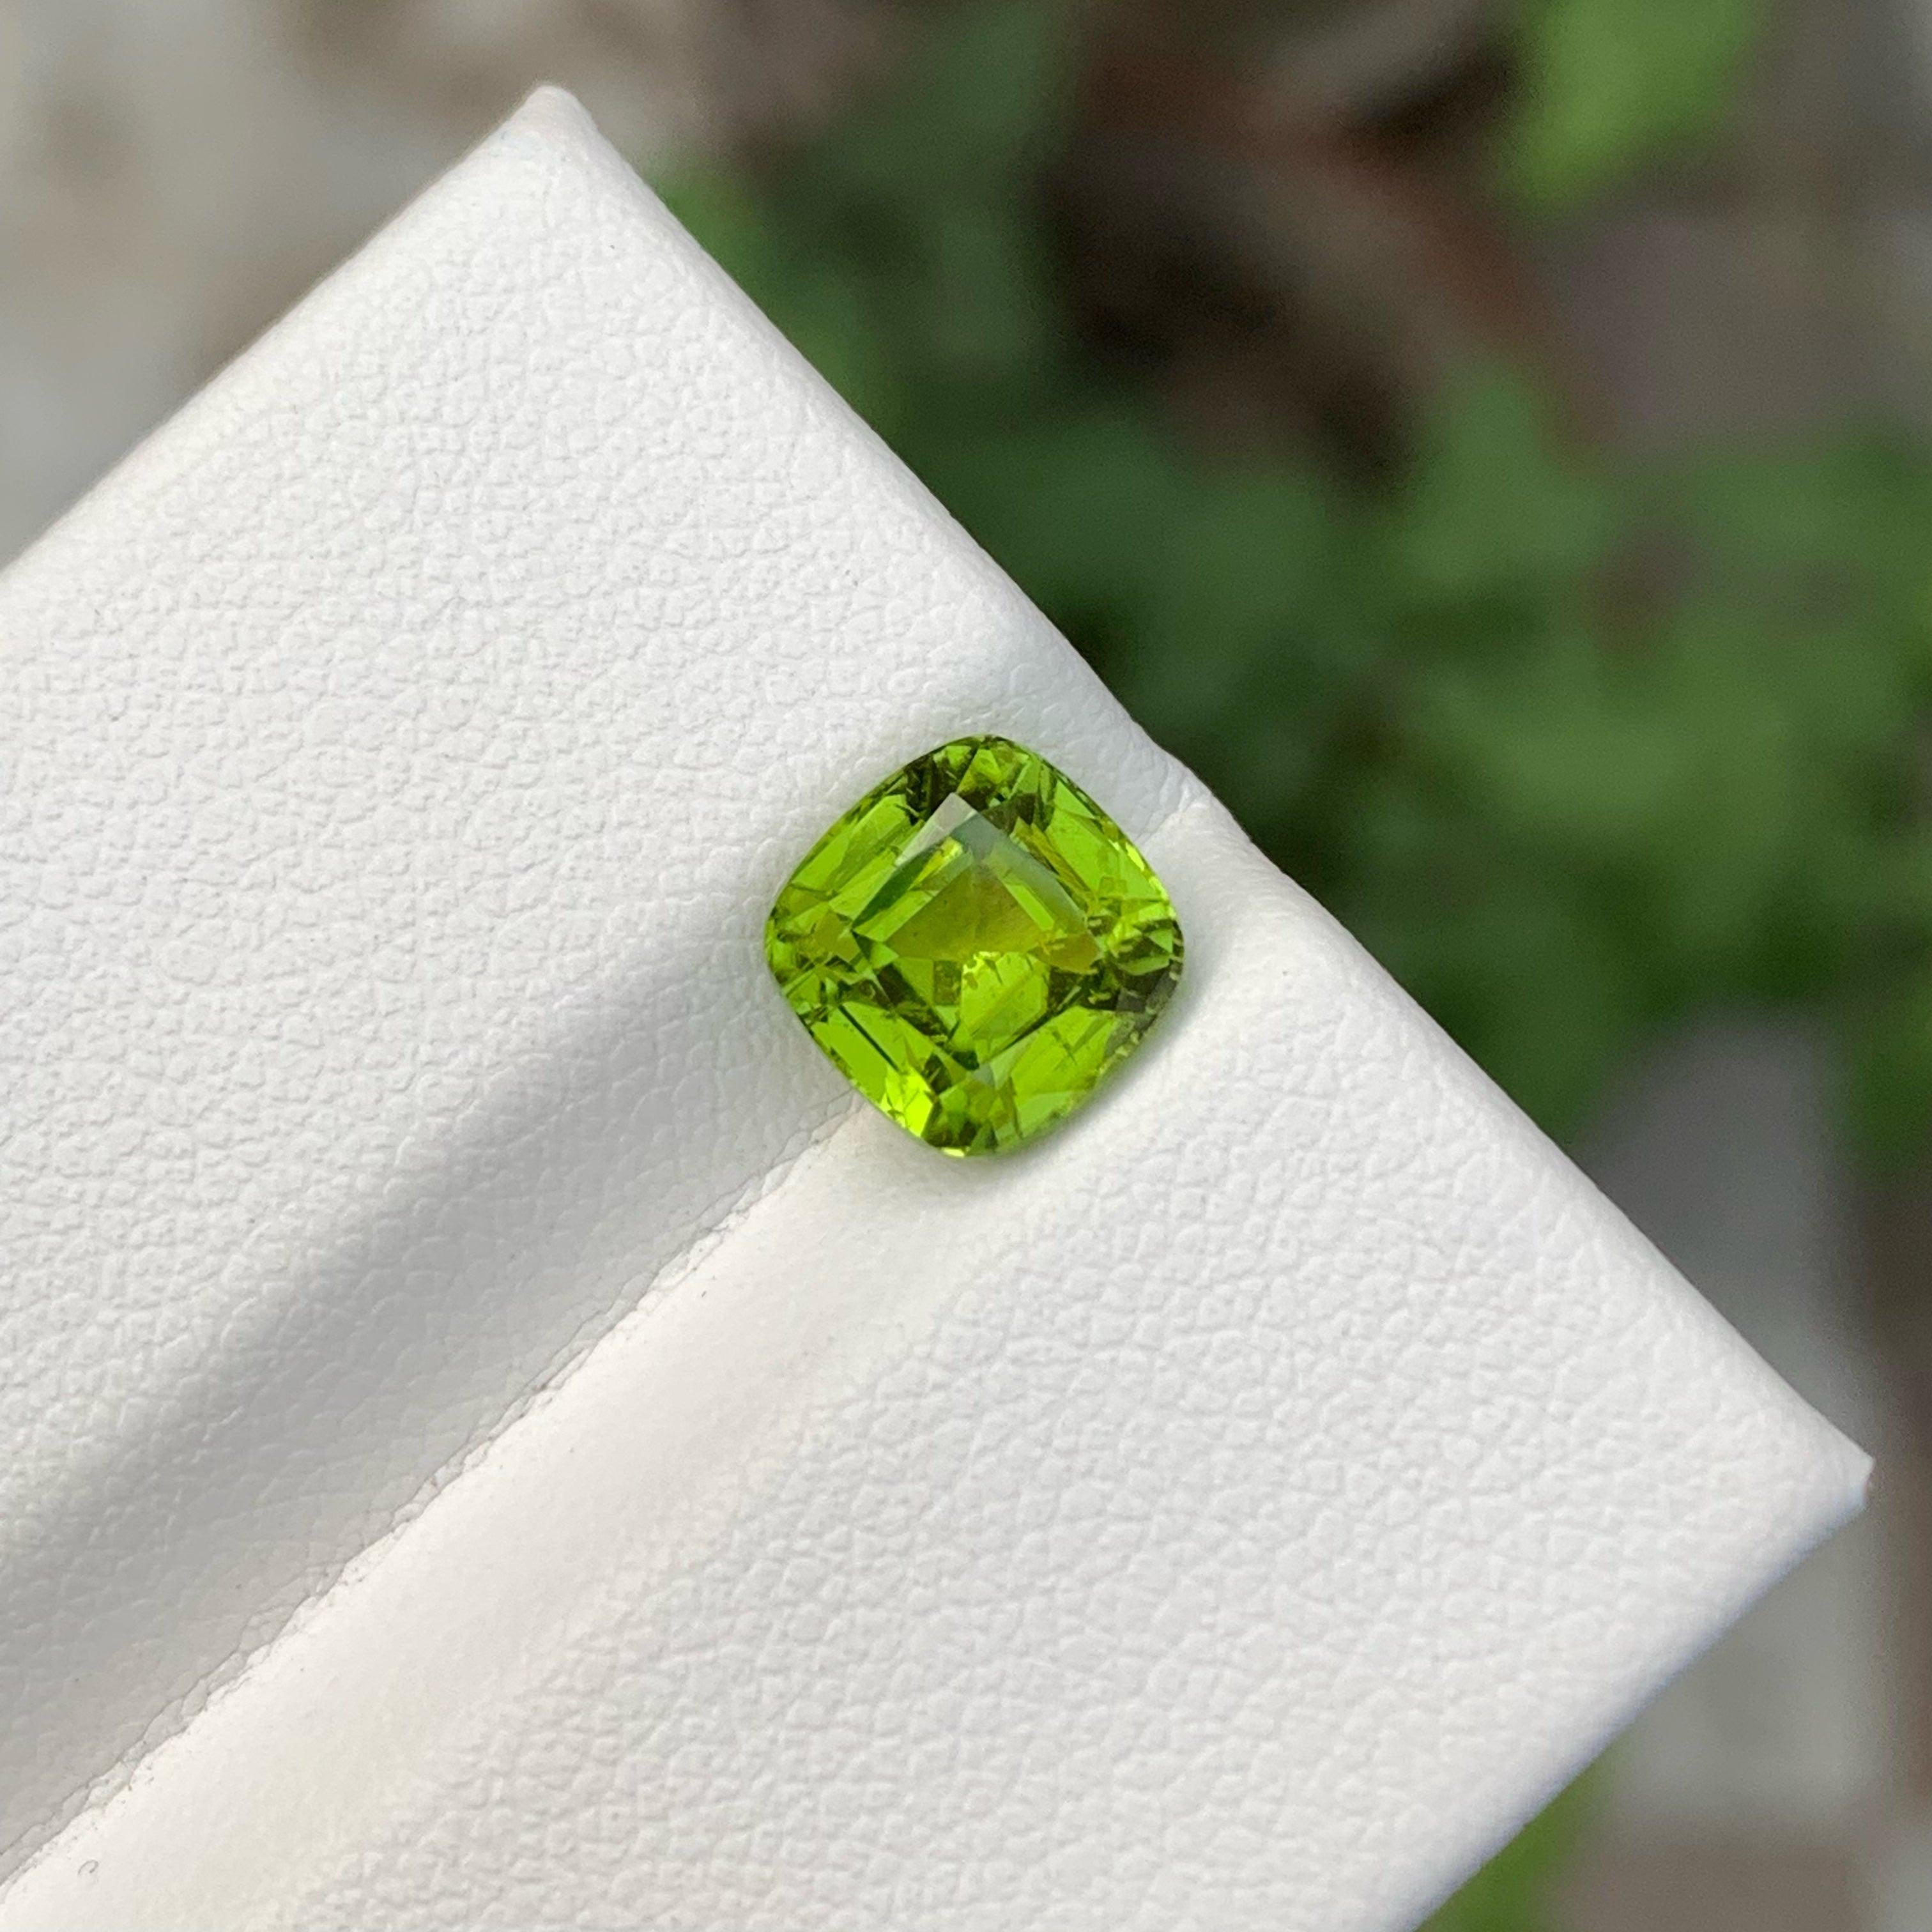 Amazing Apple Green Peridot Gemstone, Available for Sale at wholesale price natural high quality 2.90 carats SI Clarity loose Peridot from Pakistan.

 

Product Information:
GEMSTONE TYPE:	Amazing Apple Green Peridot Gemstone
WEIGHT:	2.90